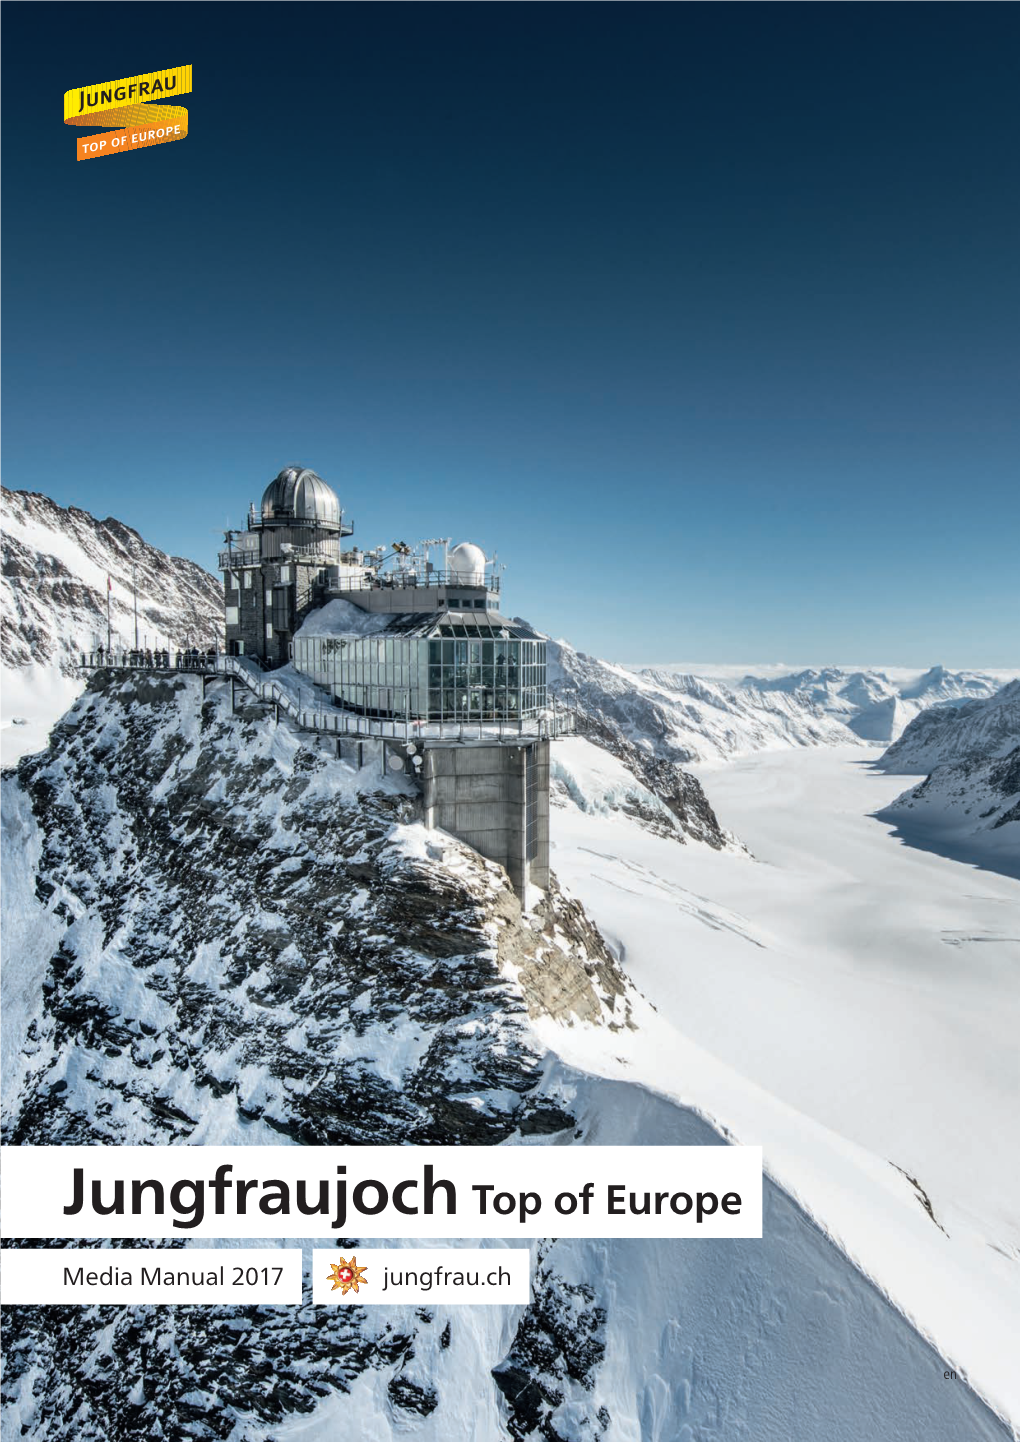 Jungfrau Railway Is One of the World’S Most Impressive Feats of Railway Construction